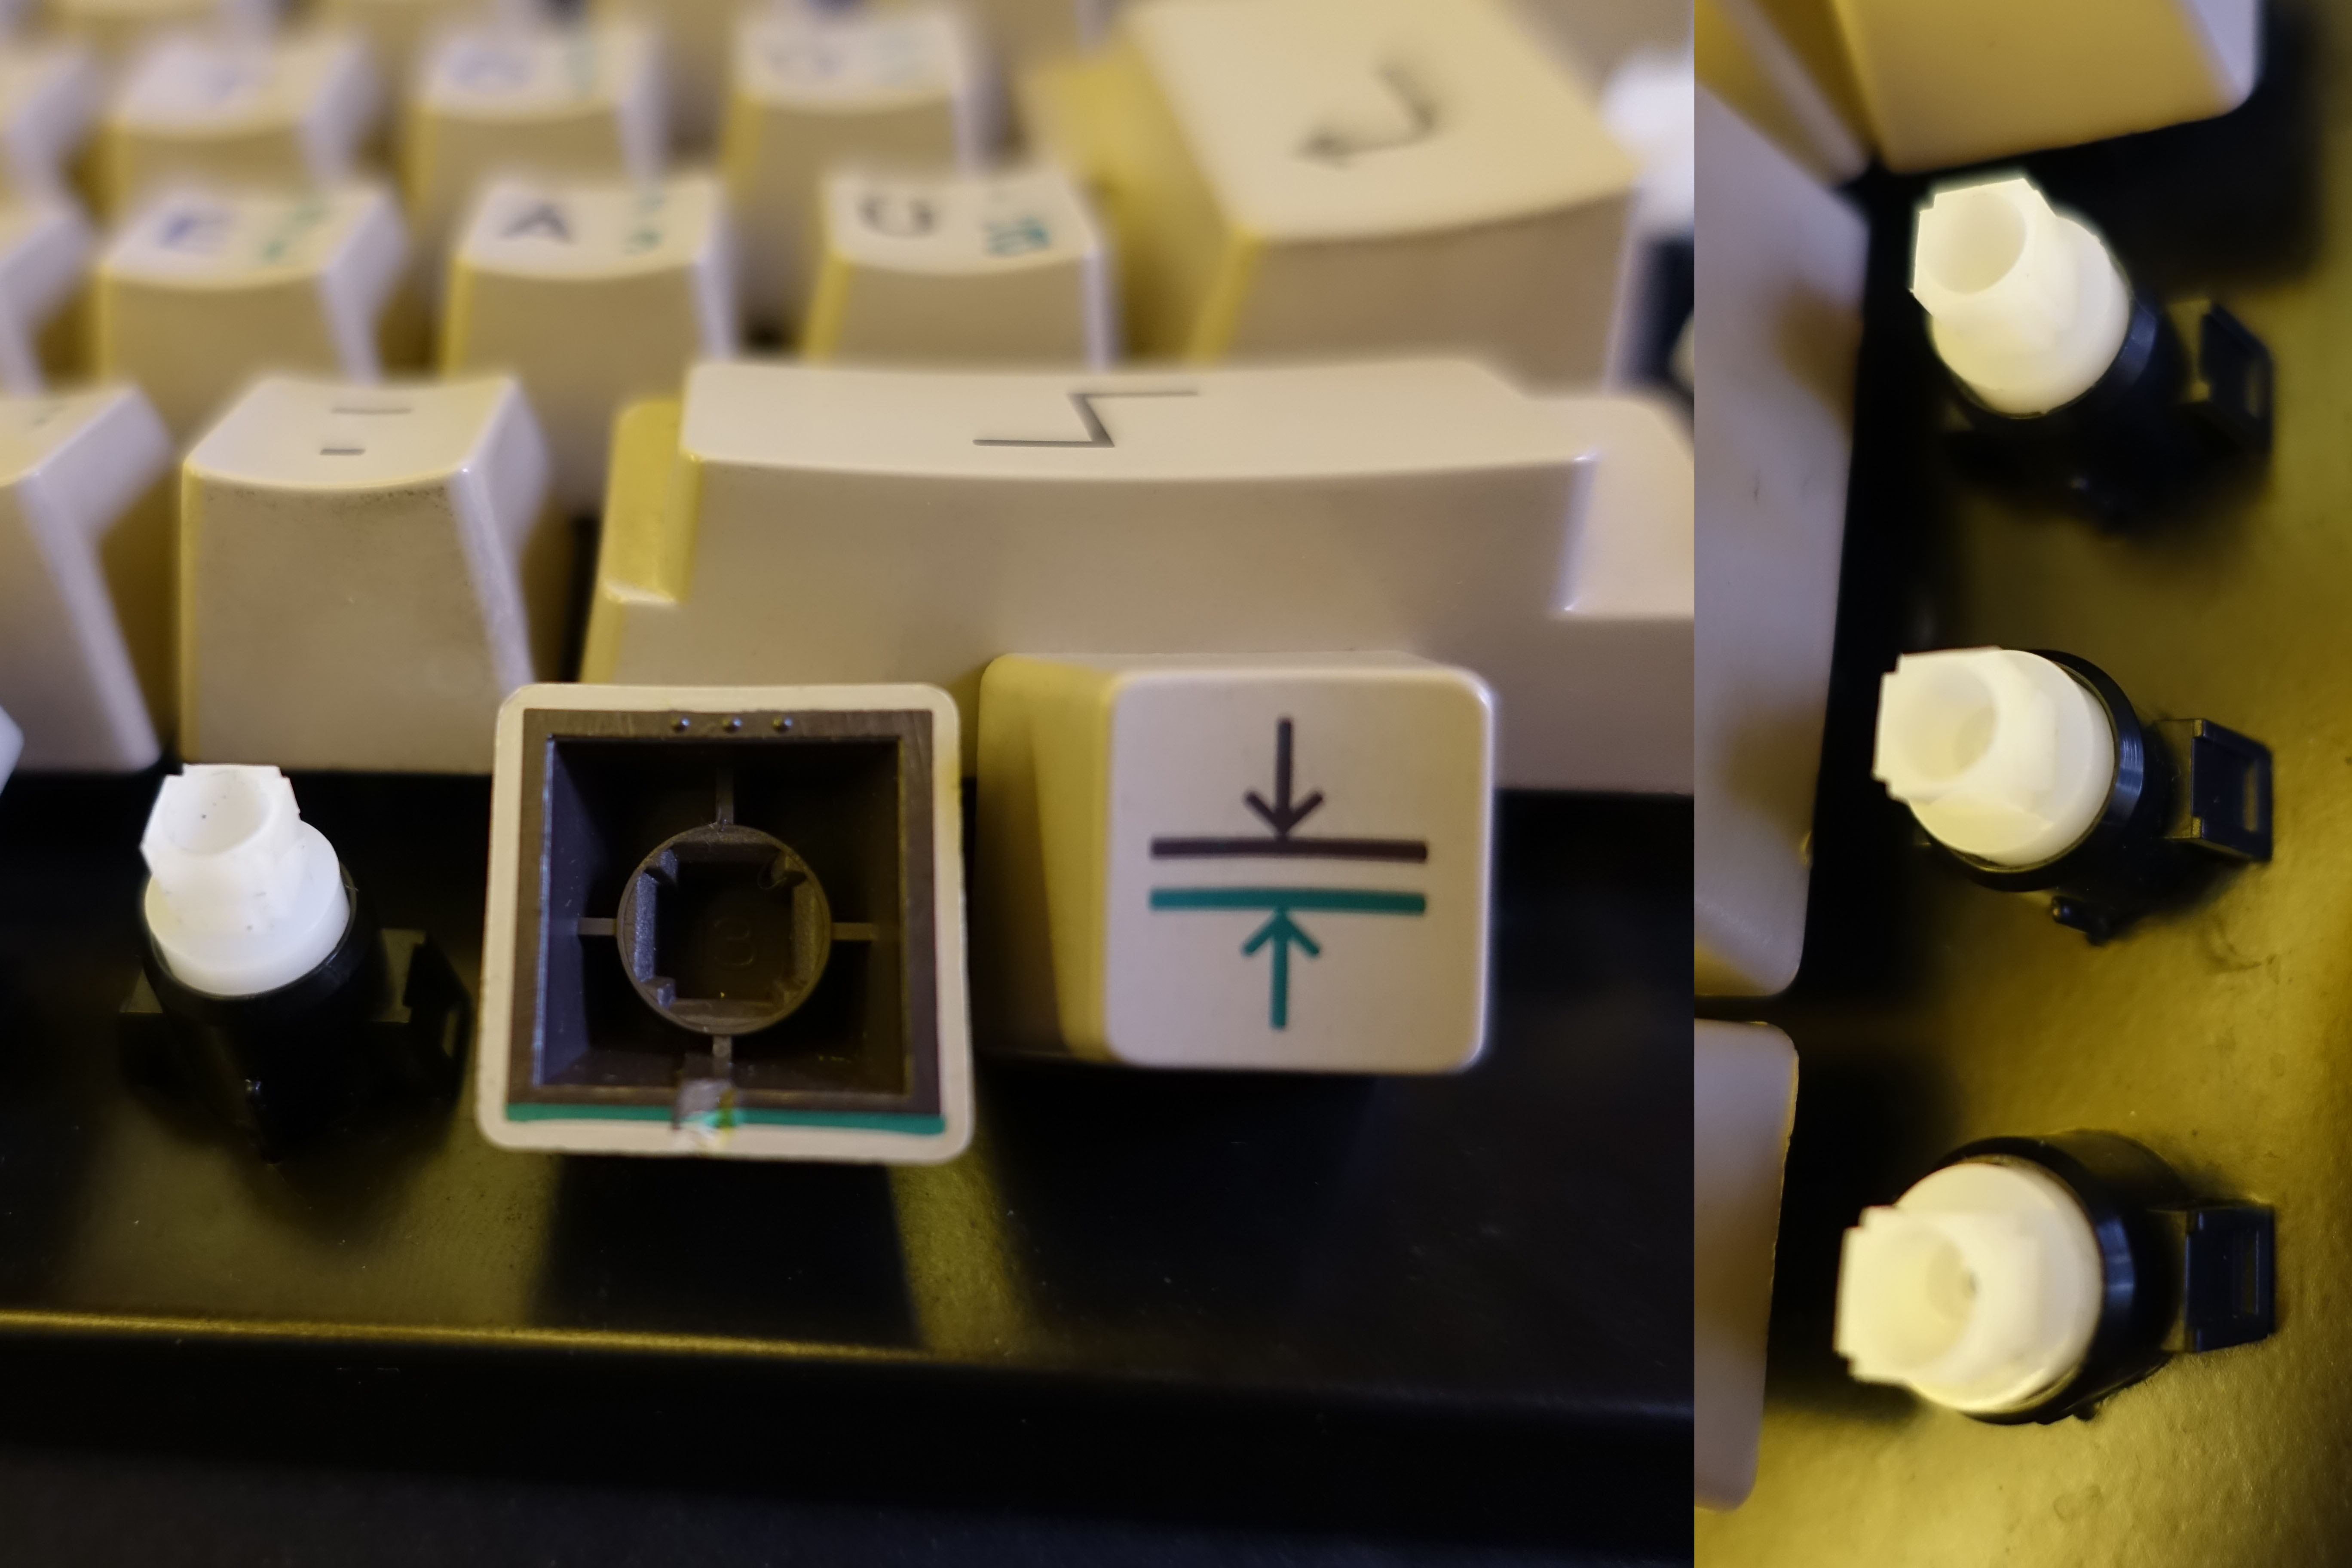 Keycaps and the mount